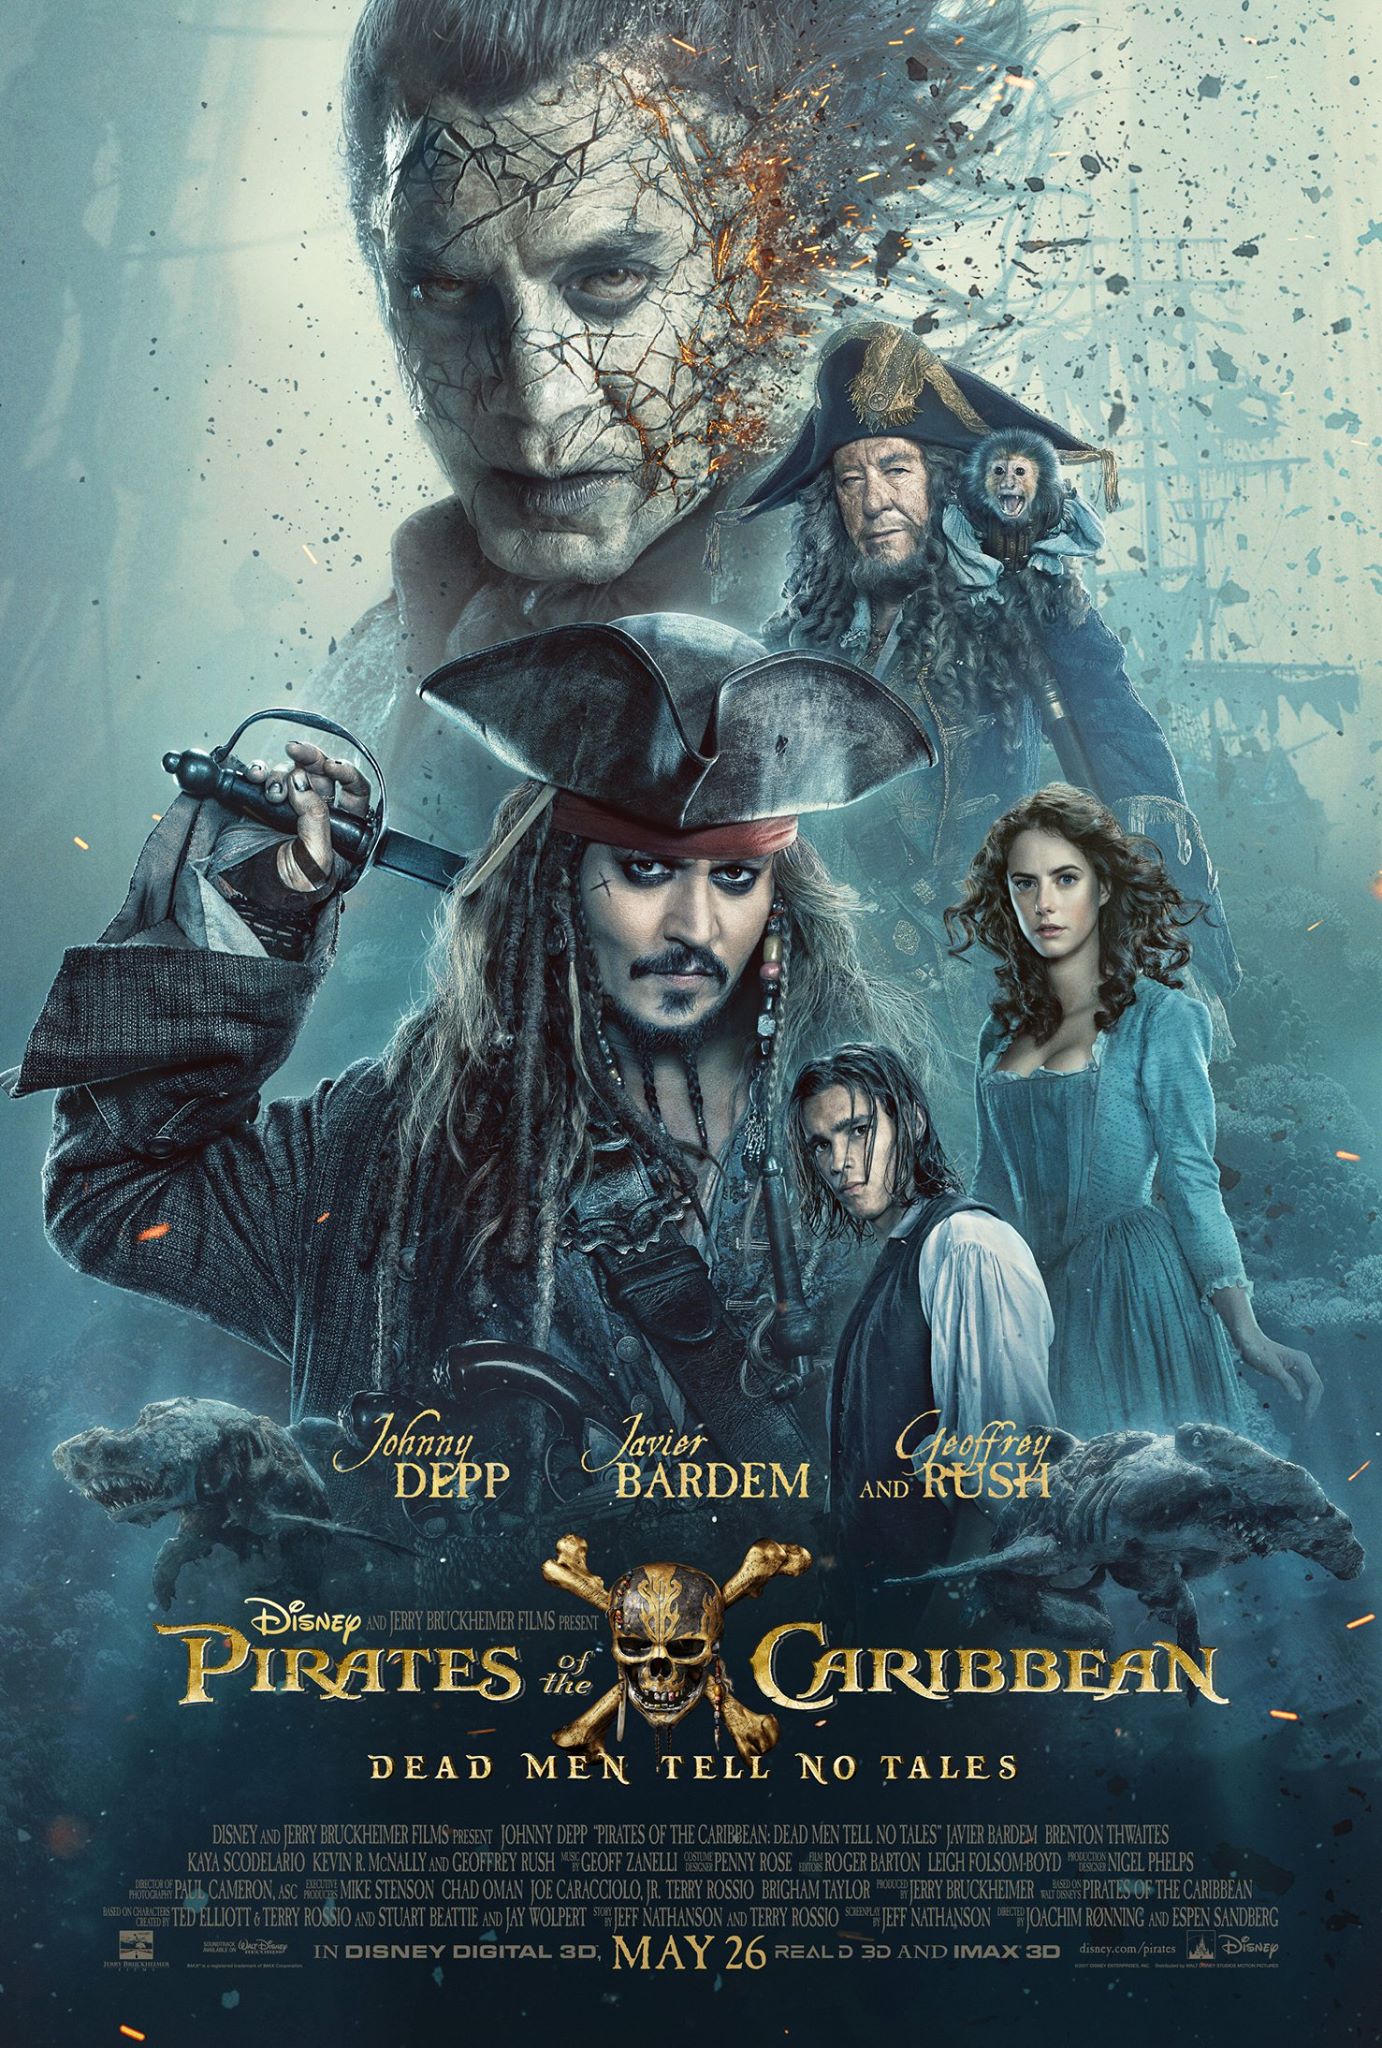 1. Pirates of the Caribbean Dead Men Tell No Tales